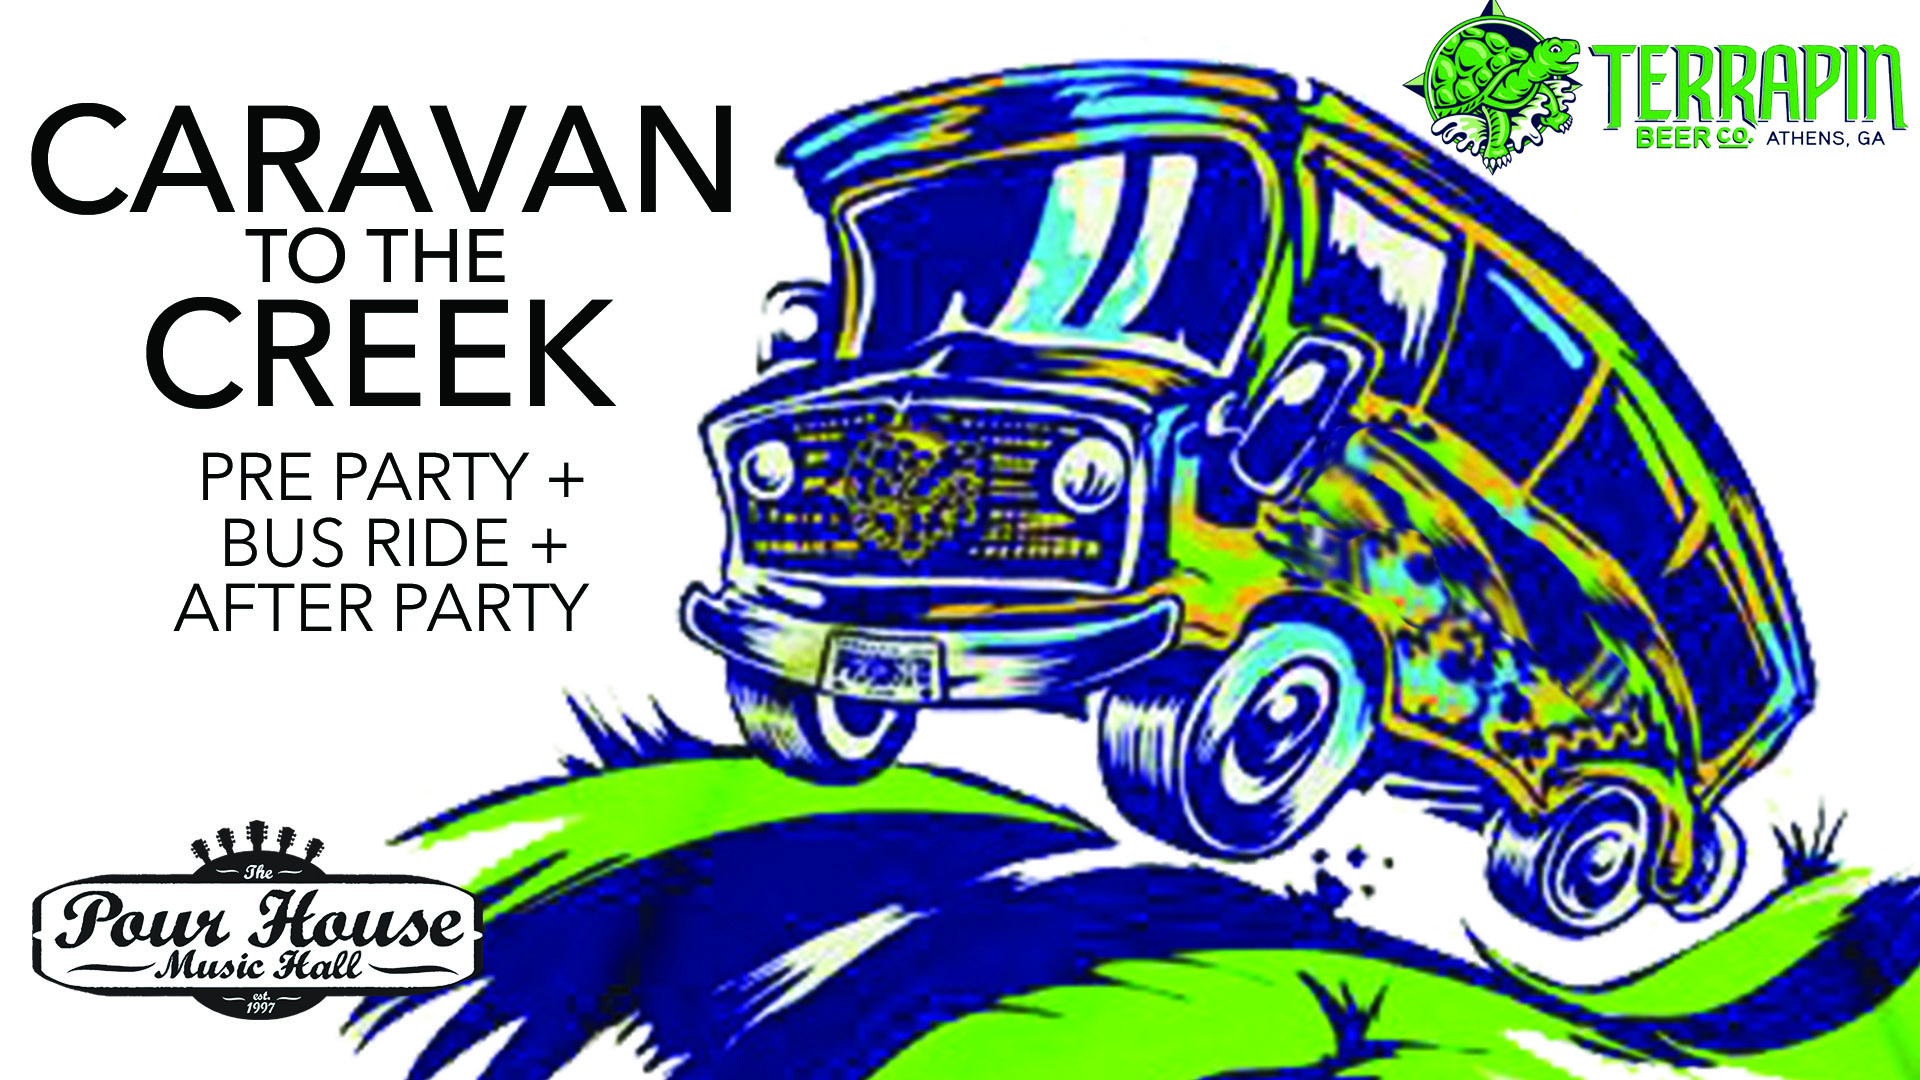 Caravan to the Creek - A Pre-Party/Bus Ride/After Party Package